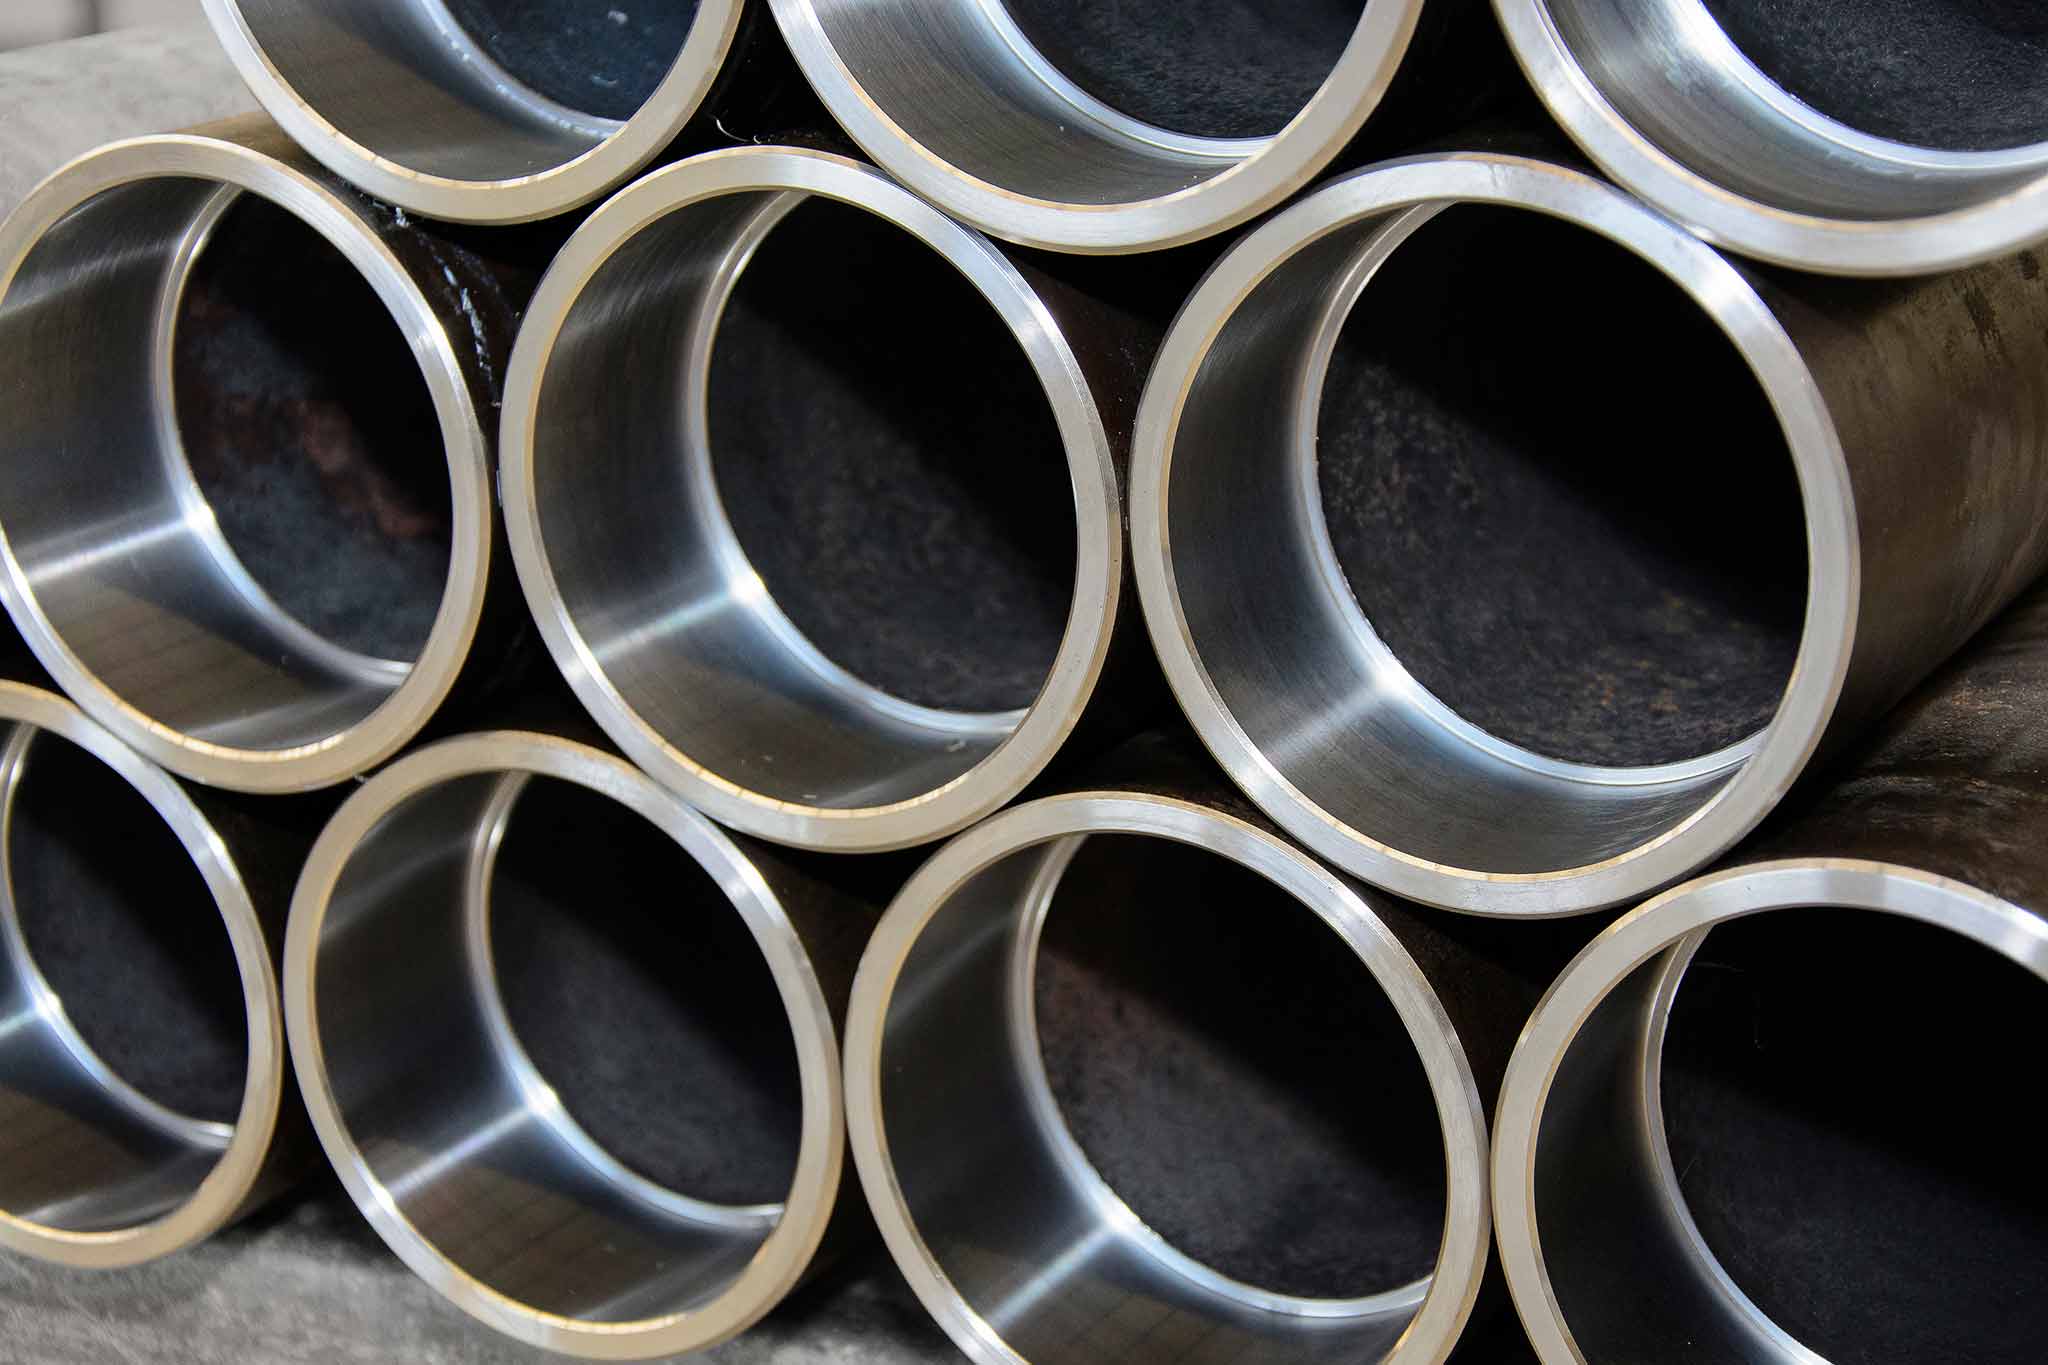 A total of ten pipe ends are shown in the image, some of them cut. They are stacked on top of each other. 